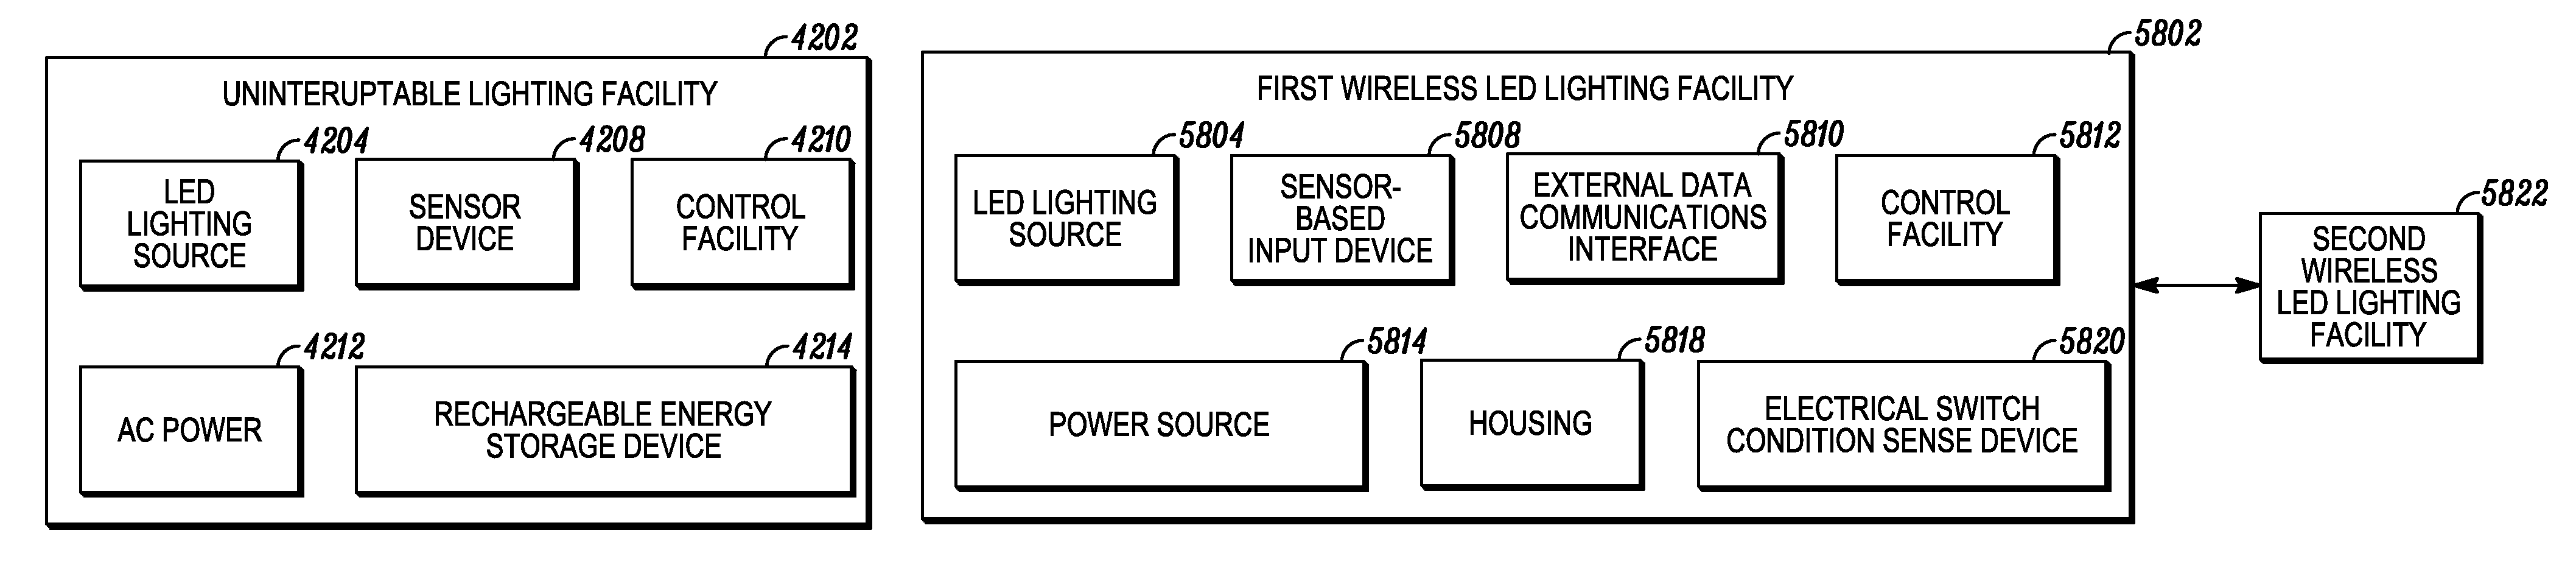 Wireless lighting devices and applications